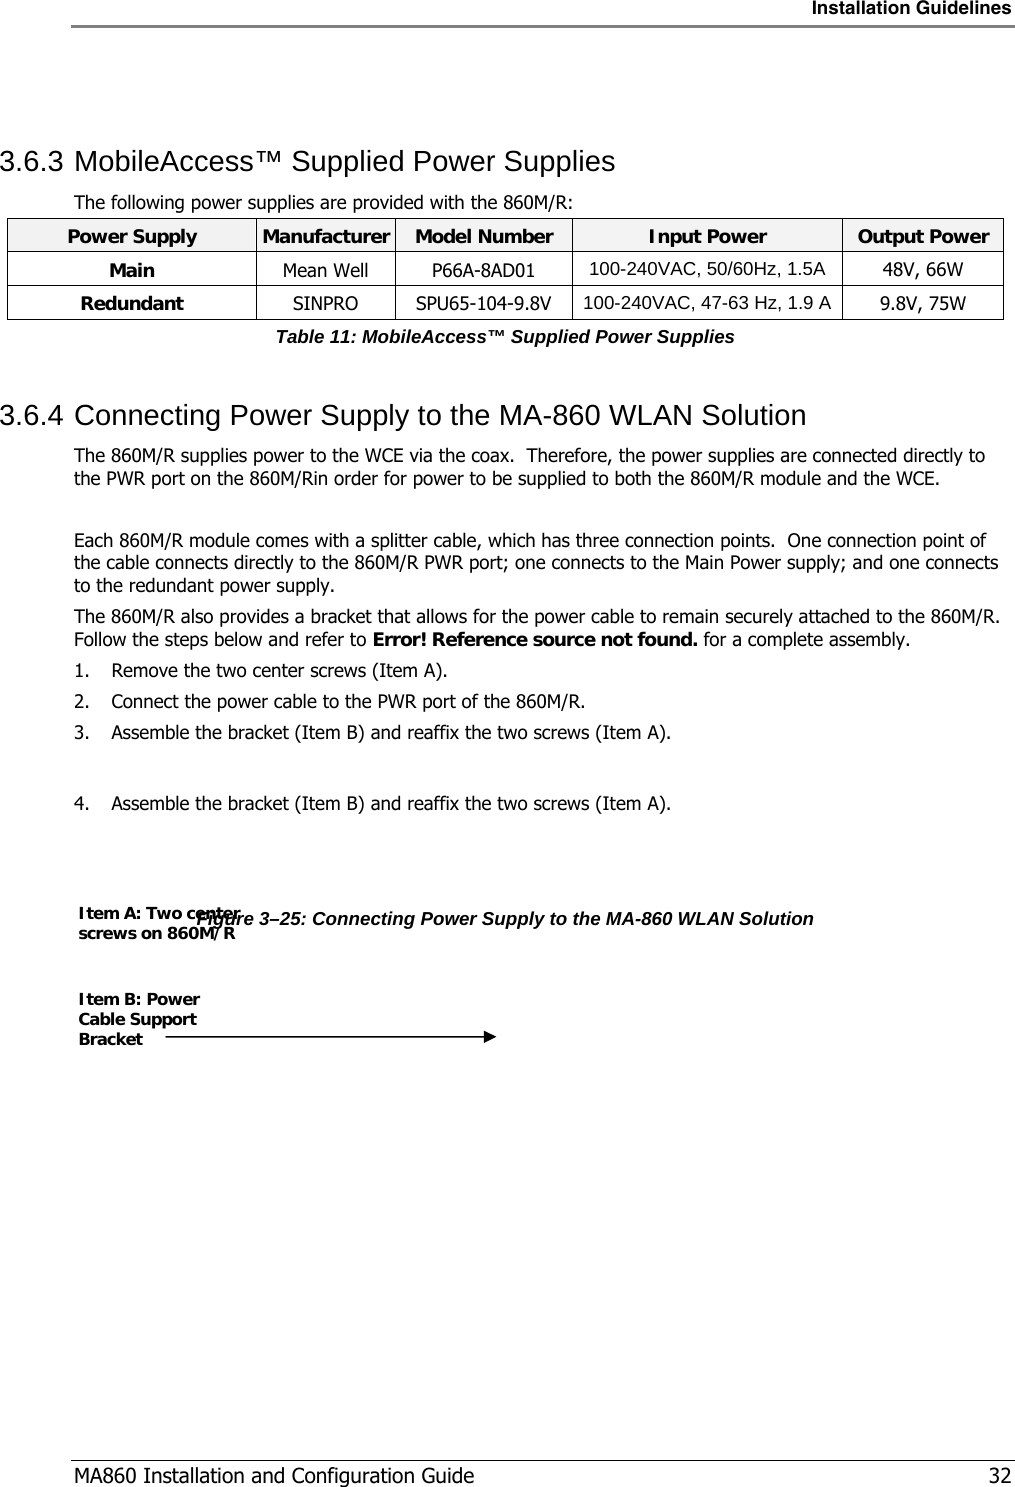 Installation Guidelines  MA860 Installation and Configuration Guide   32  3.6.3 MobileAccess™ Supplied Power Supplies The following power supplies are provided with the 860M/R: Power Supply  Manufacturer Model Number  Input Power  Output Power Main Mean Well P66A-8AD01 100-240VAC, 50/60Hz, 1.5A 48V, 66W Redundant SINPRO SPU65-104-9.8V  100-240VAC, 47-63 Hz, 1.9 A    9.8V, 75W Table 11: MobileAccess™ Supplied Power Supplies 3.6.4 Connecting Power Supply to the MA-860 WLAN Solution The 860M/R supplies power to the WCE via the coax.  Therefore, the power supplies are connected directly to the PWR port on the 860M/Rin order for power to be supplied to both the 860M/R module and the WCE.  Each 860M/R module comes with a splitter cable, which has three connection points.  One connection point of the cable connects directly to the 860M/R PWR port; one connects to the Main Power supply; and one connects to the redundant power supply.   The 860M/R also provides a bracket that allows for the power cable to remain securely attached to the 860M/R.  Follow the steps below and refer to Error! Reference source not found. for a complete assembly. 1. Remove the two center screws (Item A). 2. Connect the power cable to the PWR port of the 860M/R. 3. Assemble the bracket (Item B) and reaffix the two screws (Item A).  4. Assemble the bracket (Item B) and reaffix the two screws (Item A).   Figure  3–25: Connecting Power Supply to the MA-860 WLAN Solution Item A: Two center screws on 860M/R Item B: Power Cable Support Bracket 